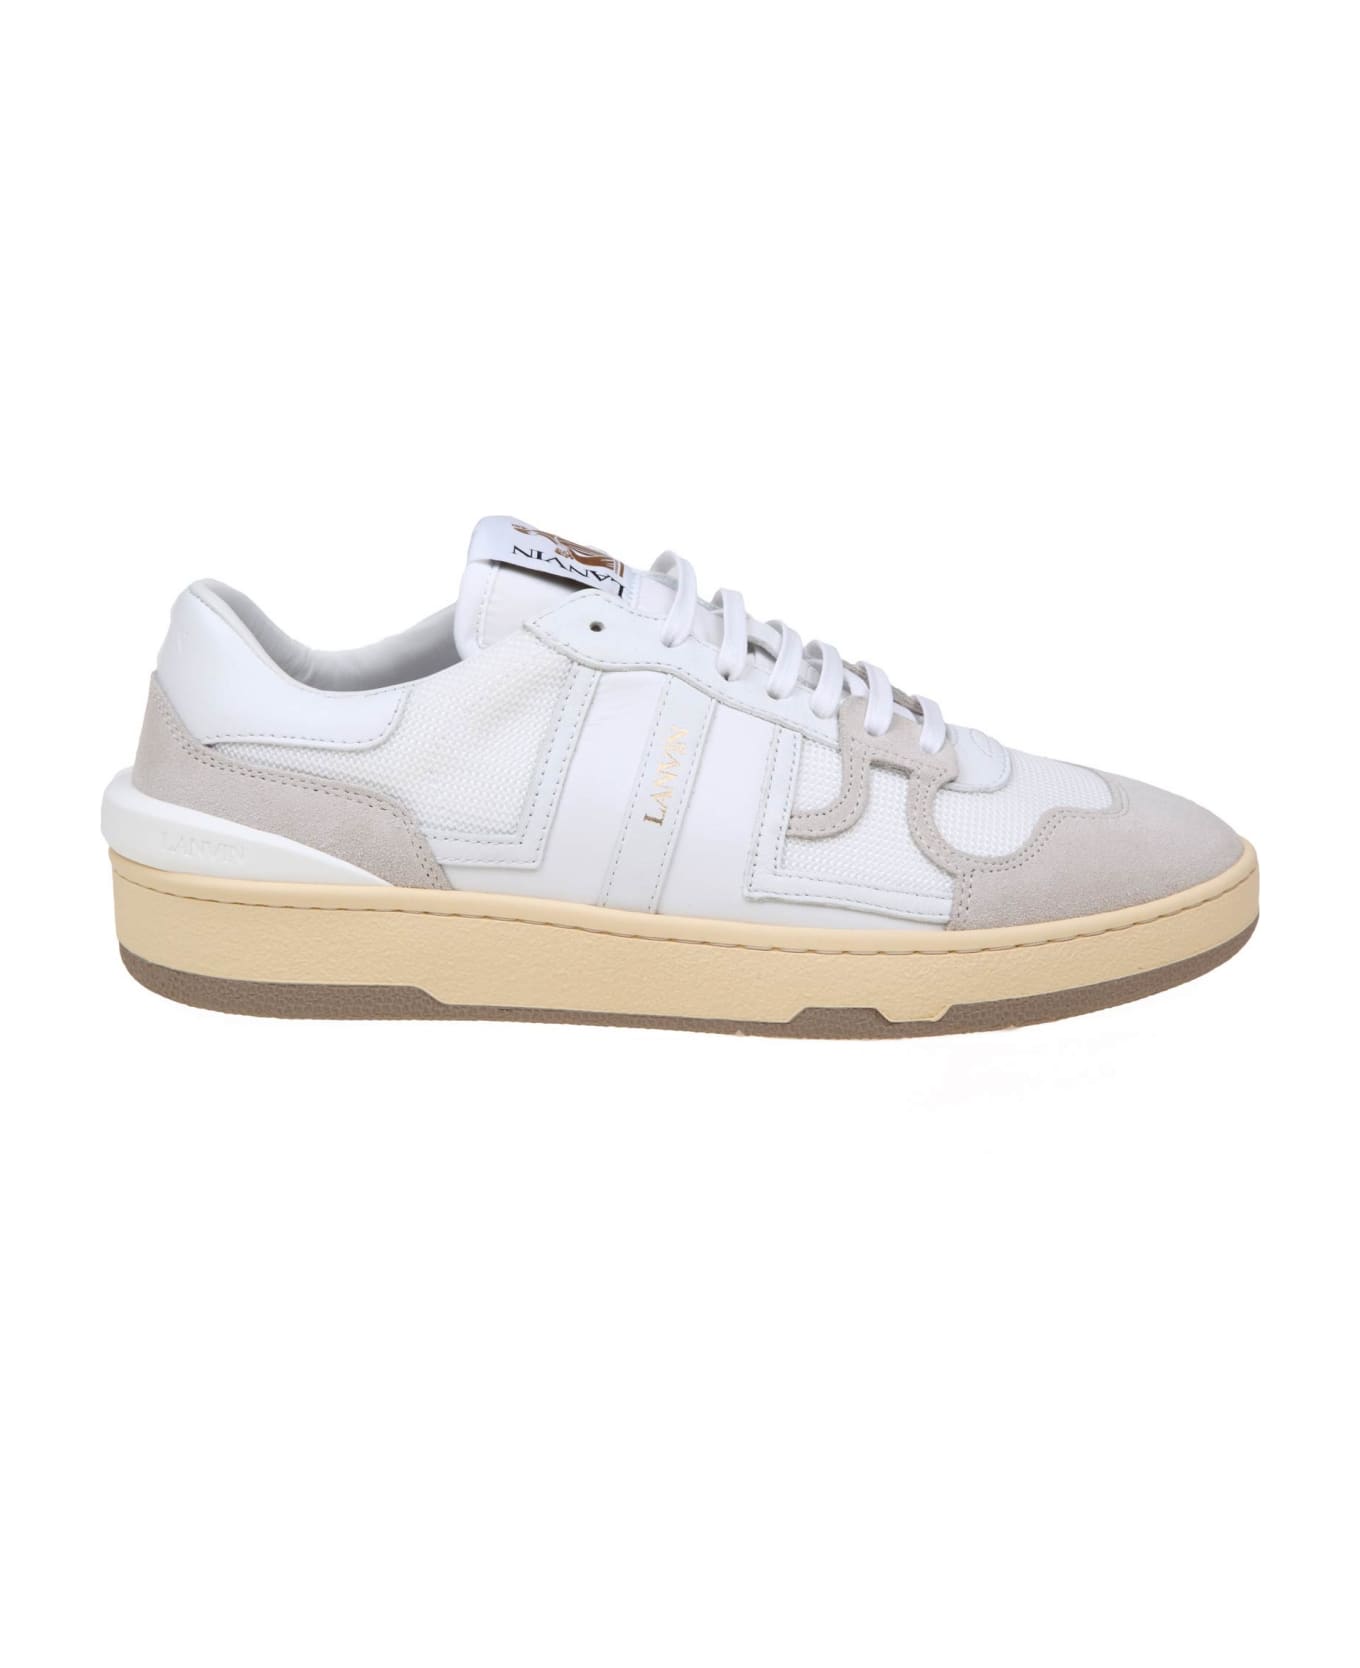 Lanvin Clay Low Top Sneakers In Mesh And Suede Color White - White